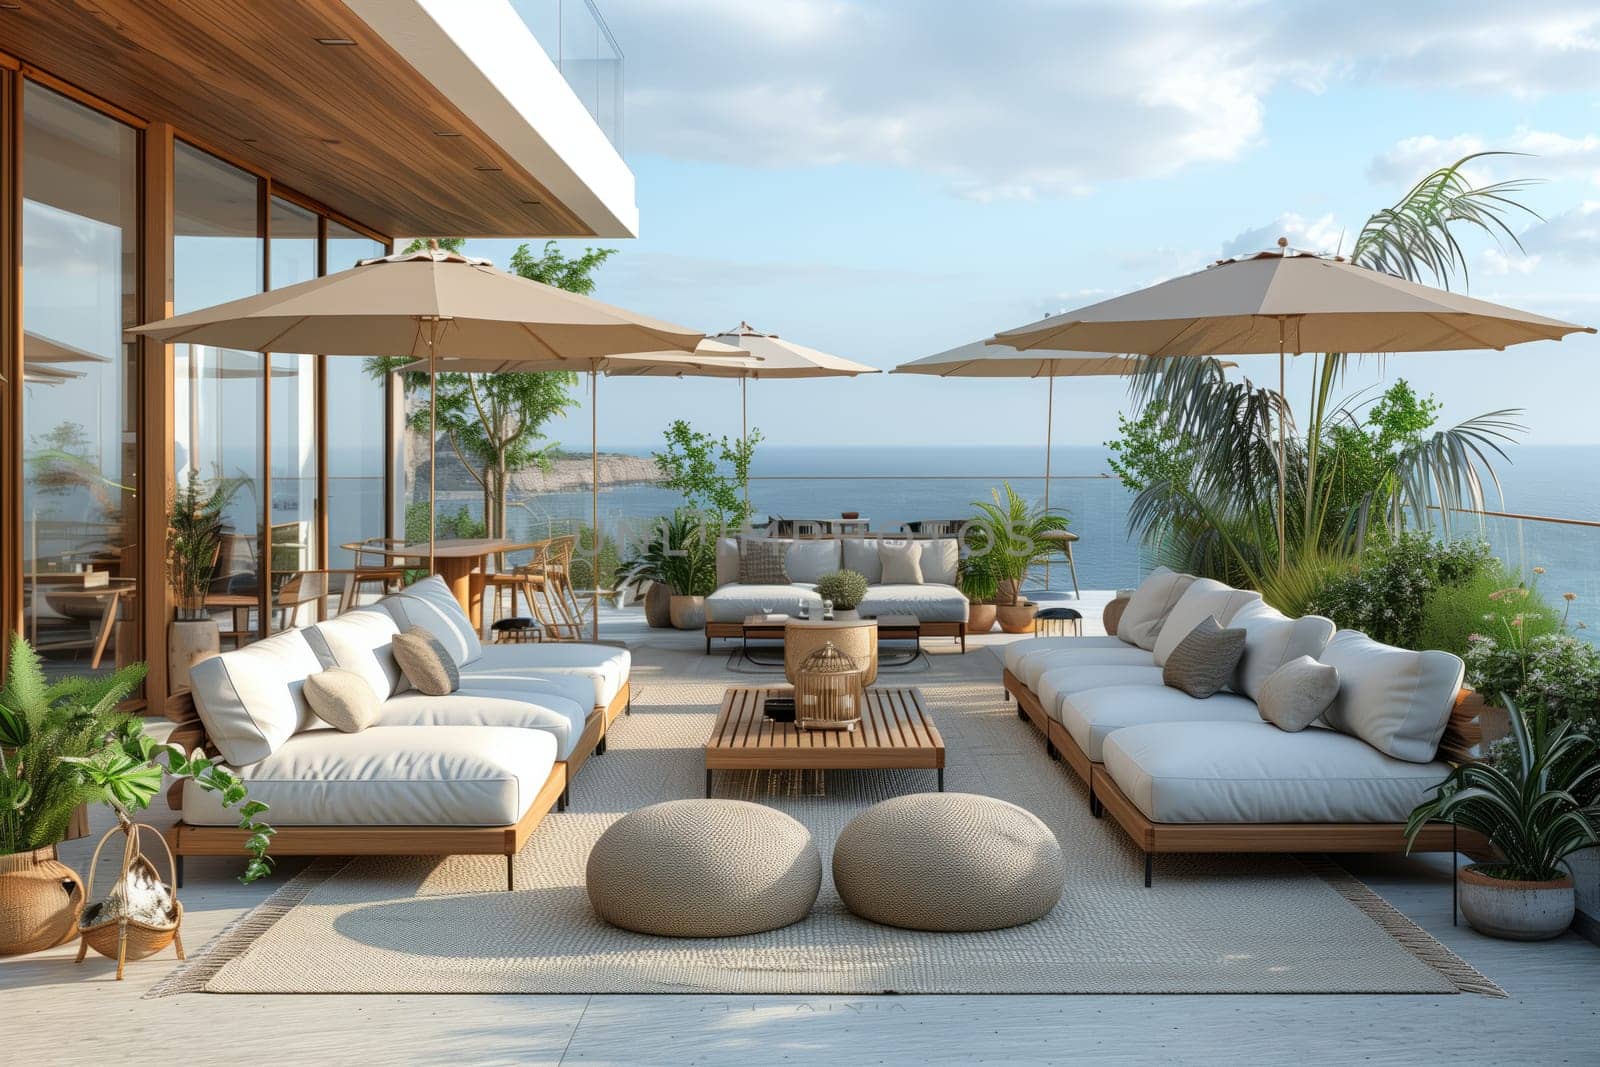 a patio with a lot of furniture and umbrellas overlooking the ocean by richwolf